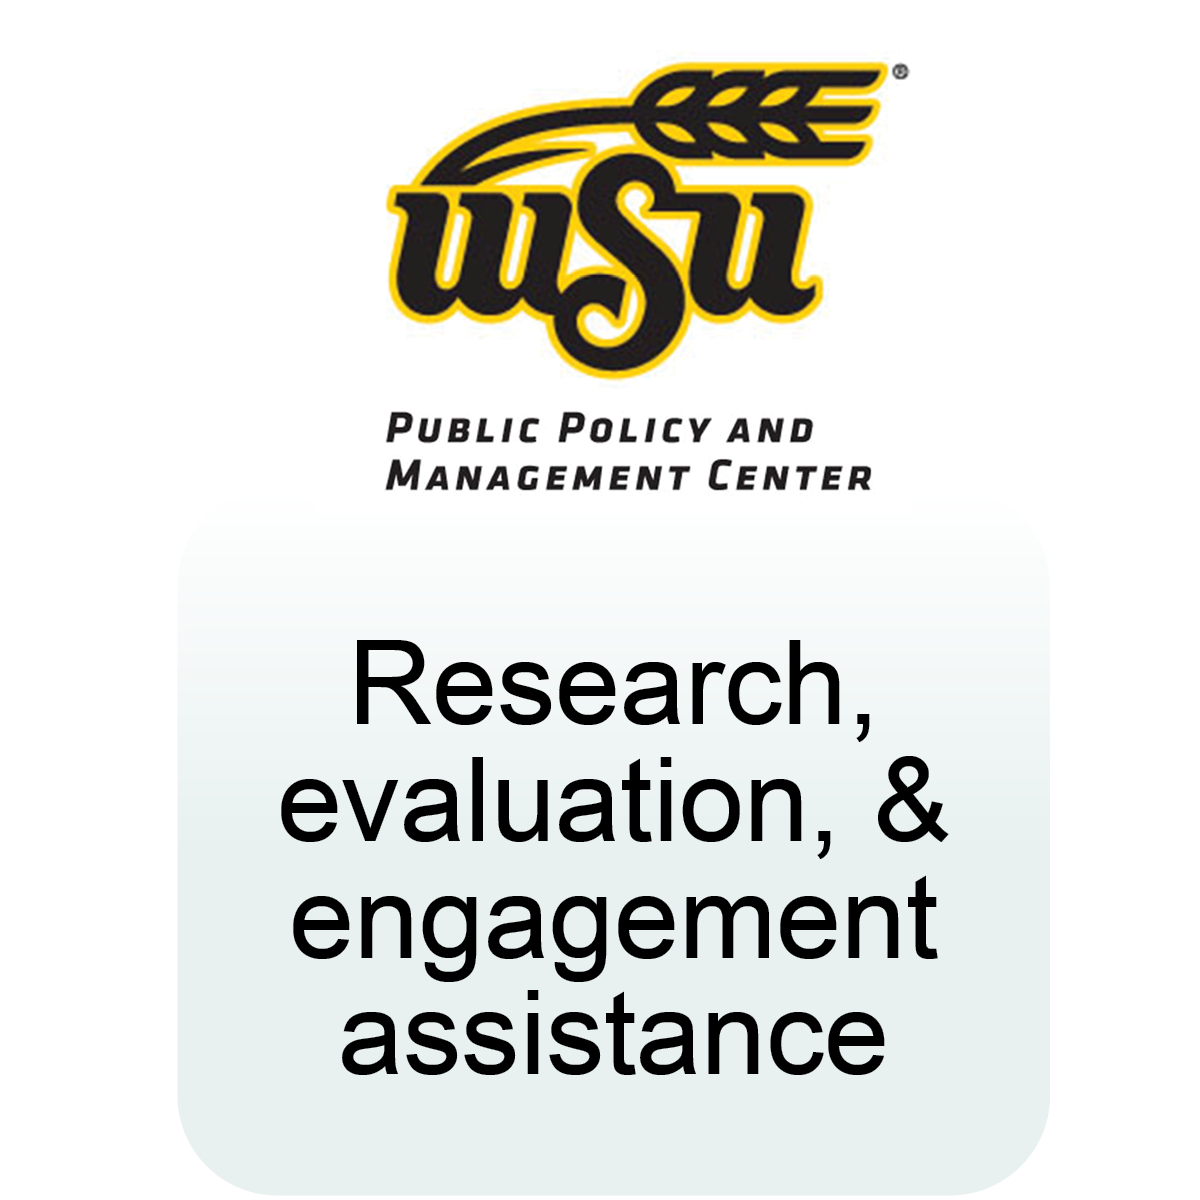 PPMC, Research, evaluation, & engagement assistance